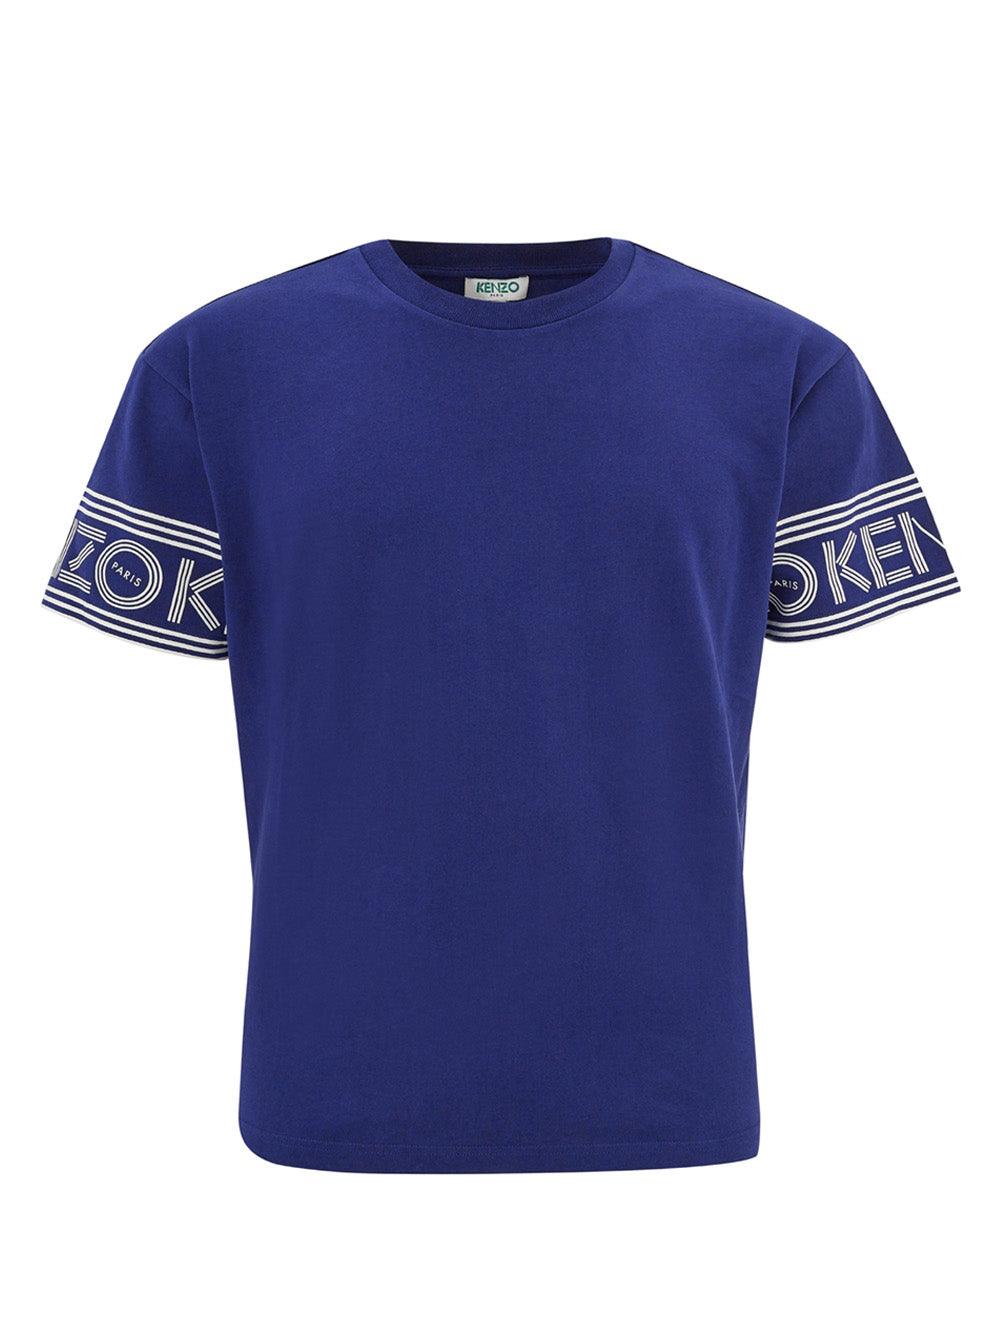 Kenzo Violet Cotton T-Shirt with Logo on Sleeves - Ellie Belle